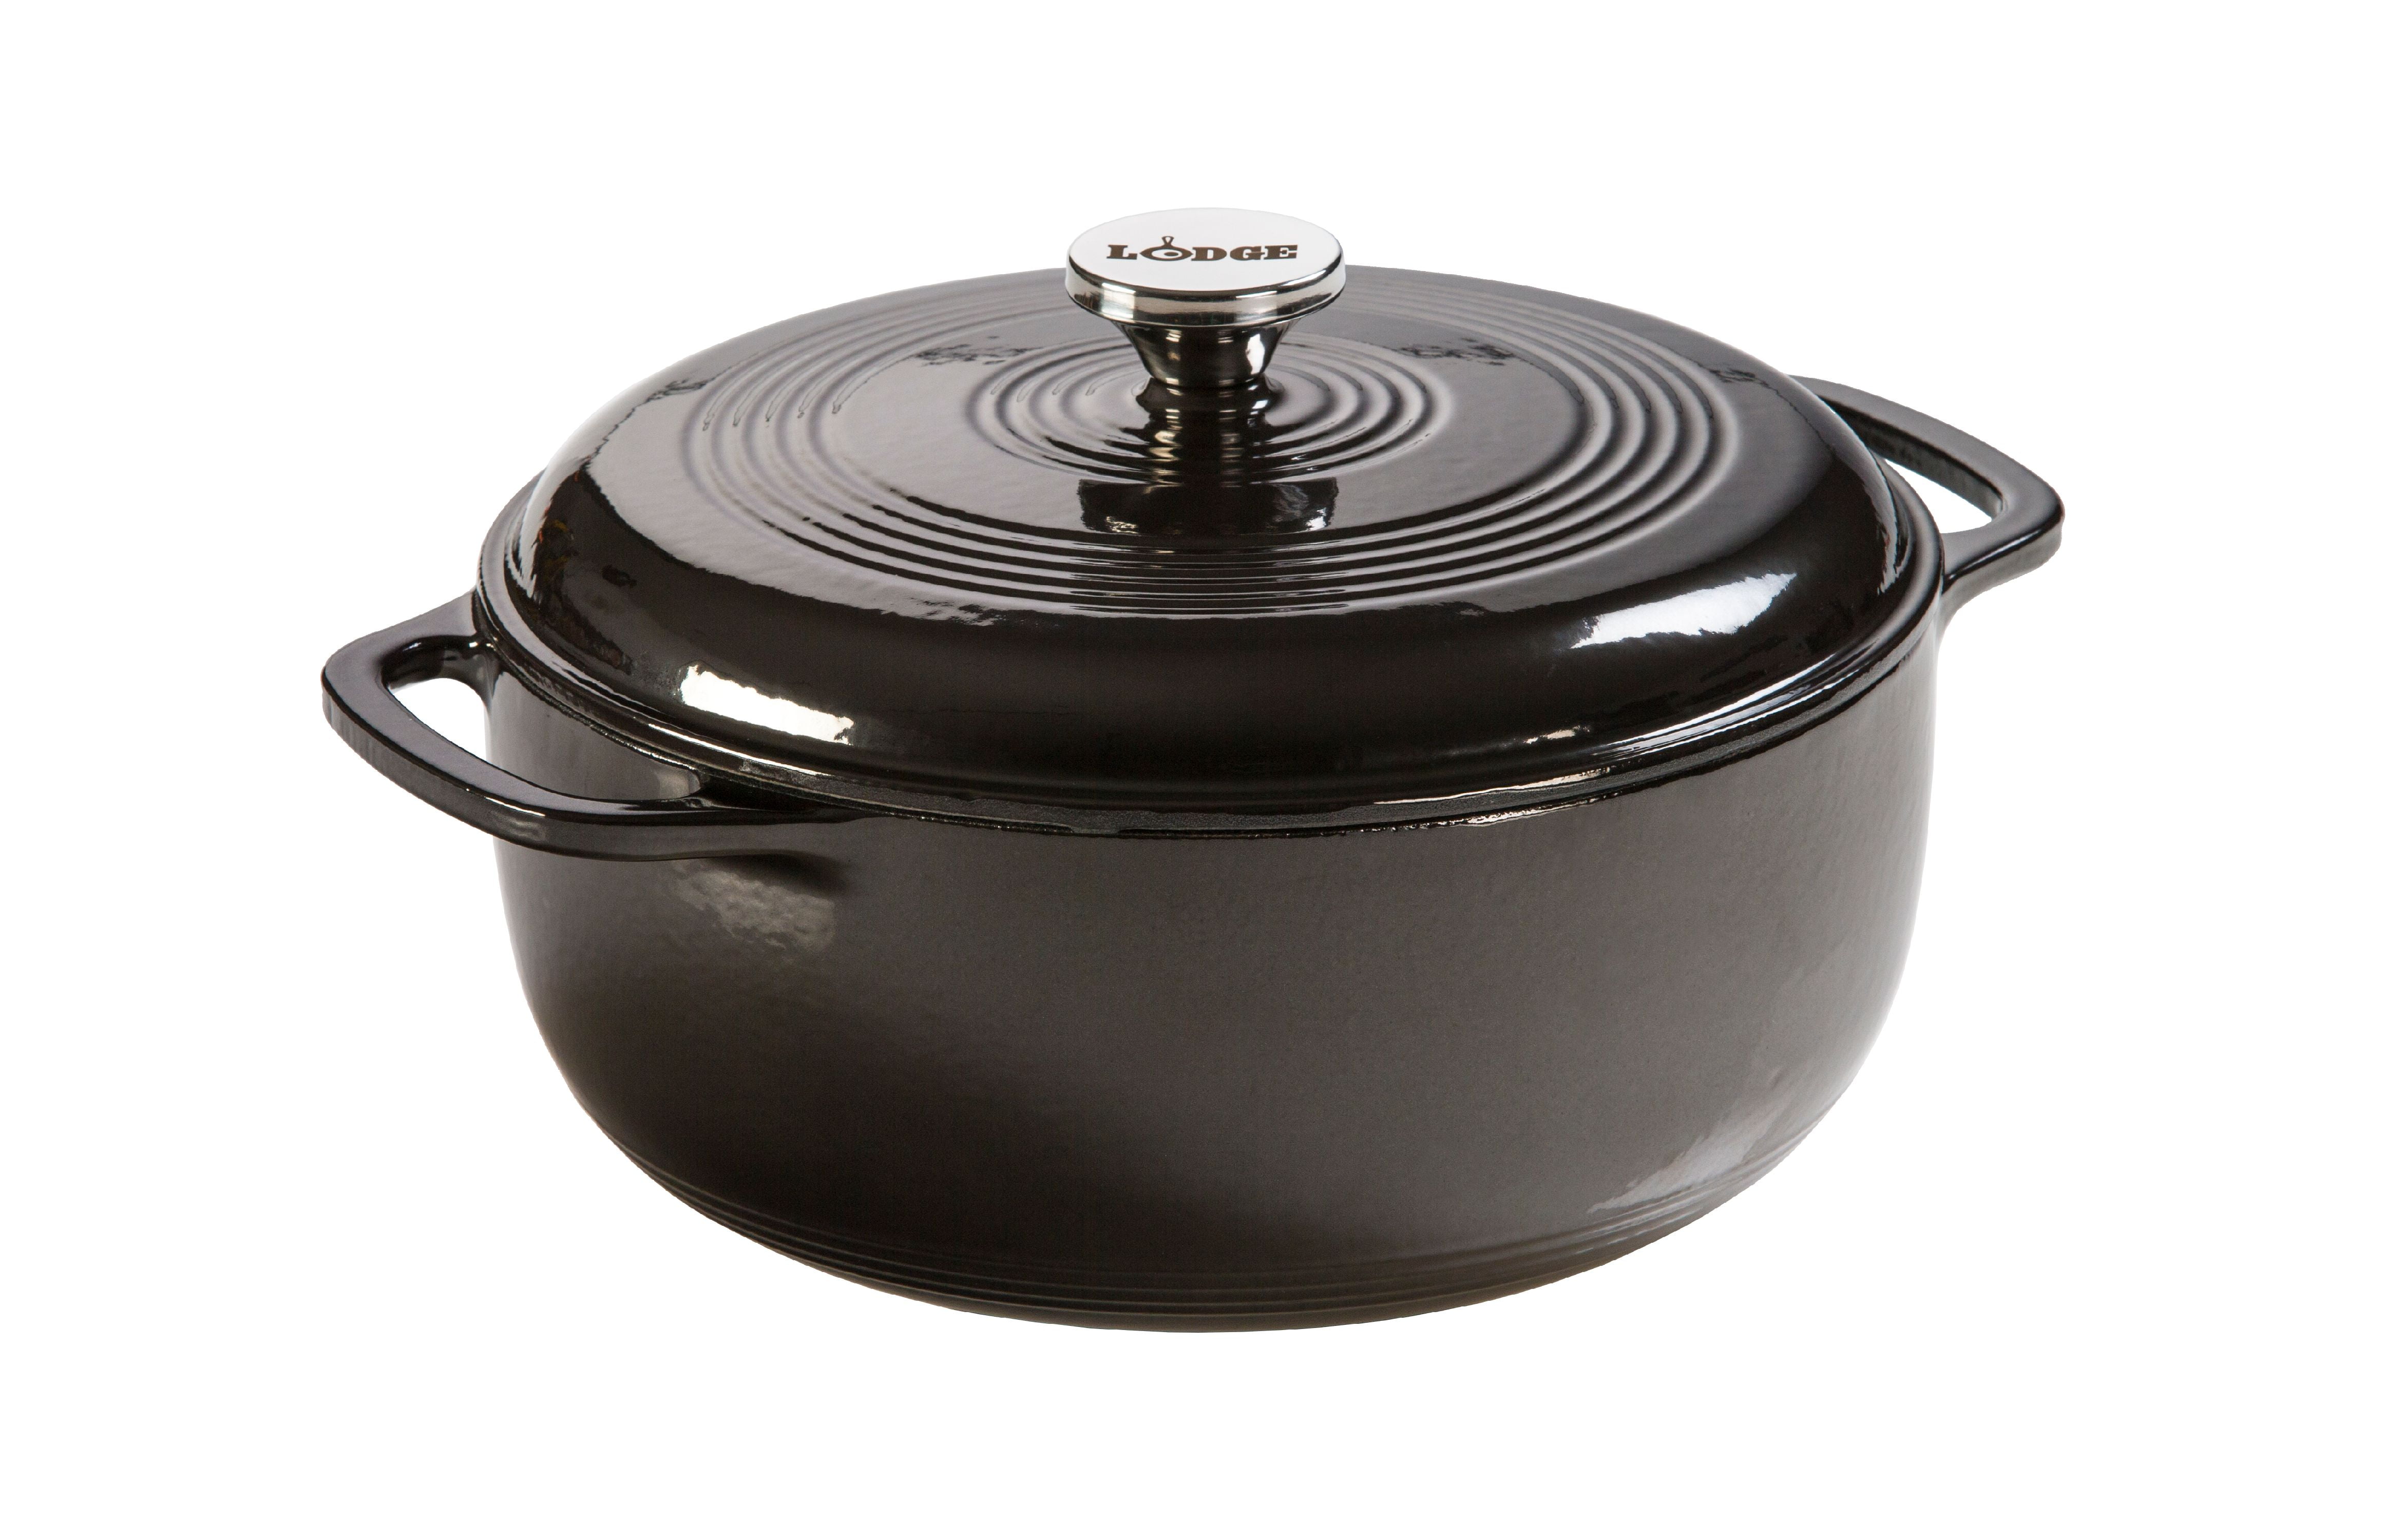 4.0 Quart Cast Iron Dutch Oven Bake,Broil,Fry & Sew Camping & Home Fit Black New